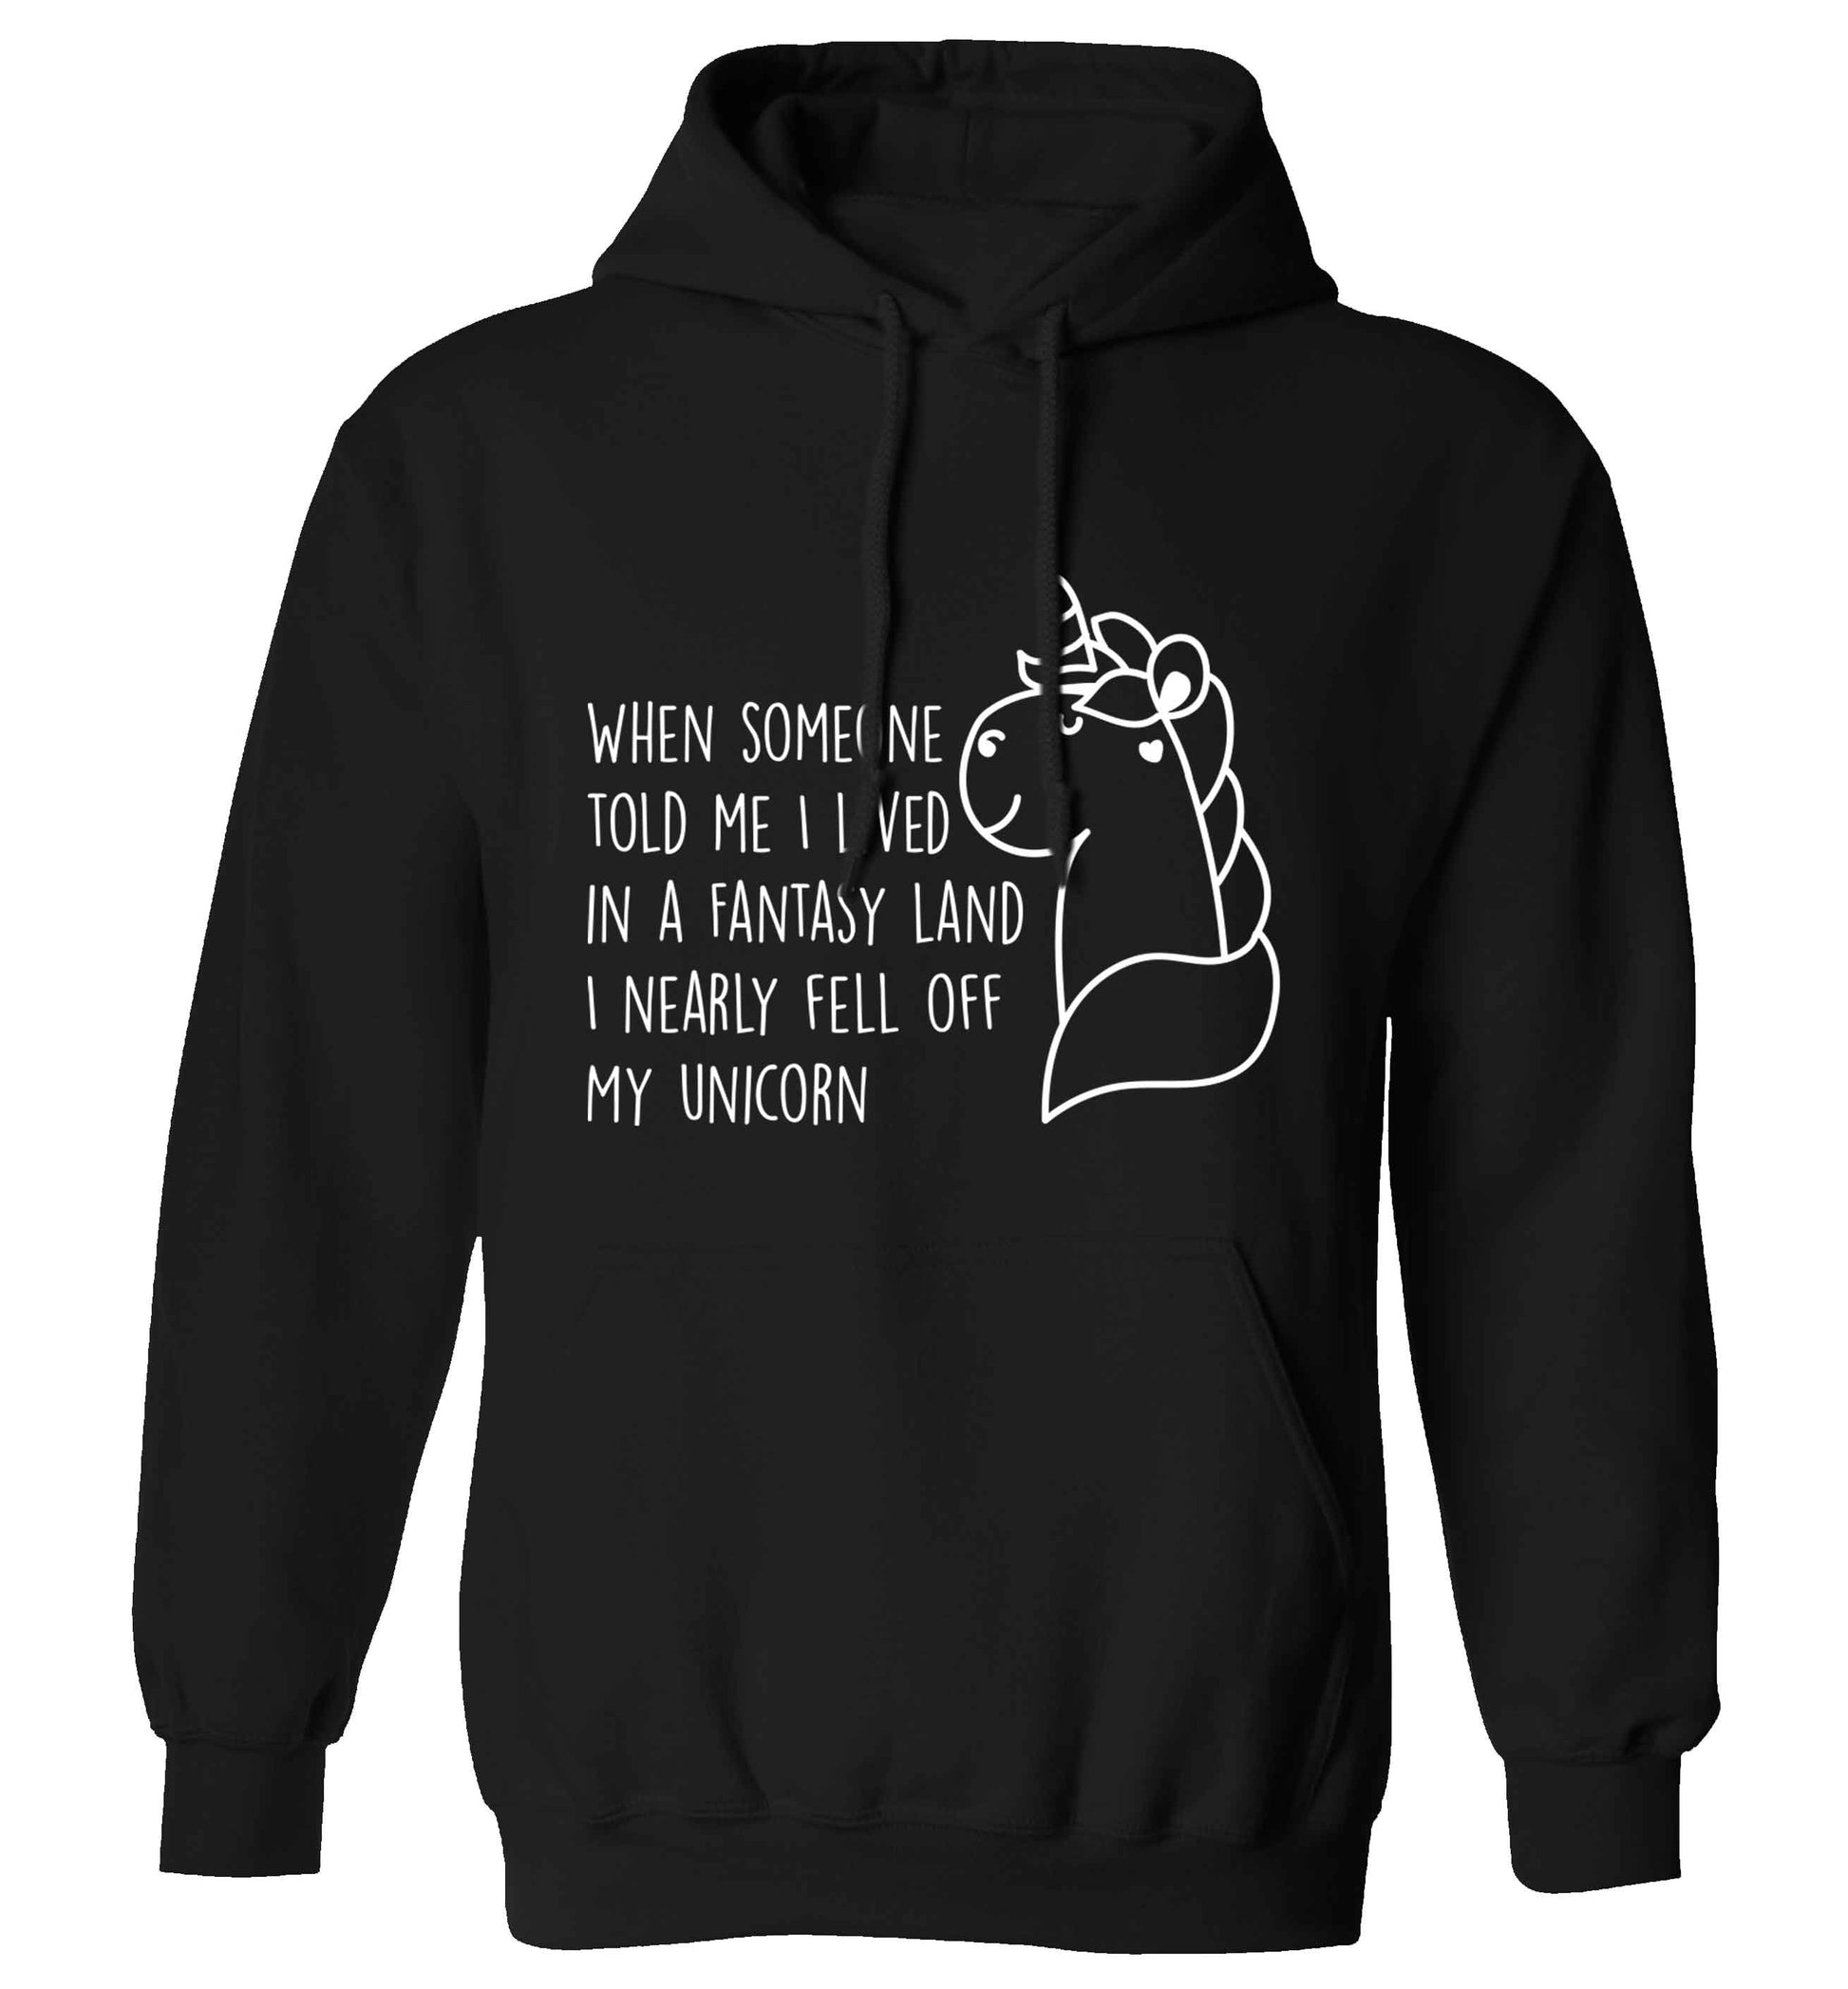 When somebody told me I lived in a fantasy land I nearly fell of my unicorn adults unisex black hoodie 2XL